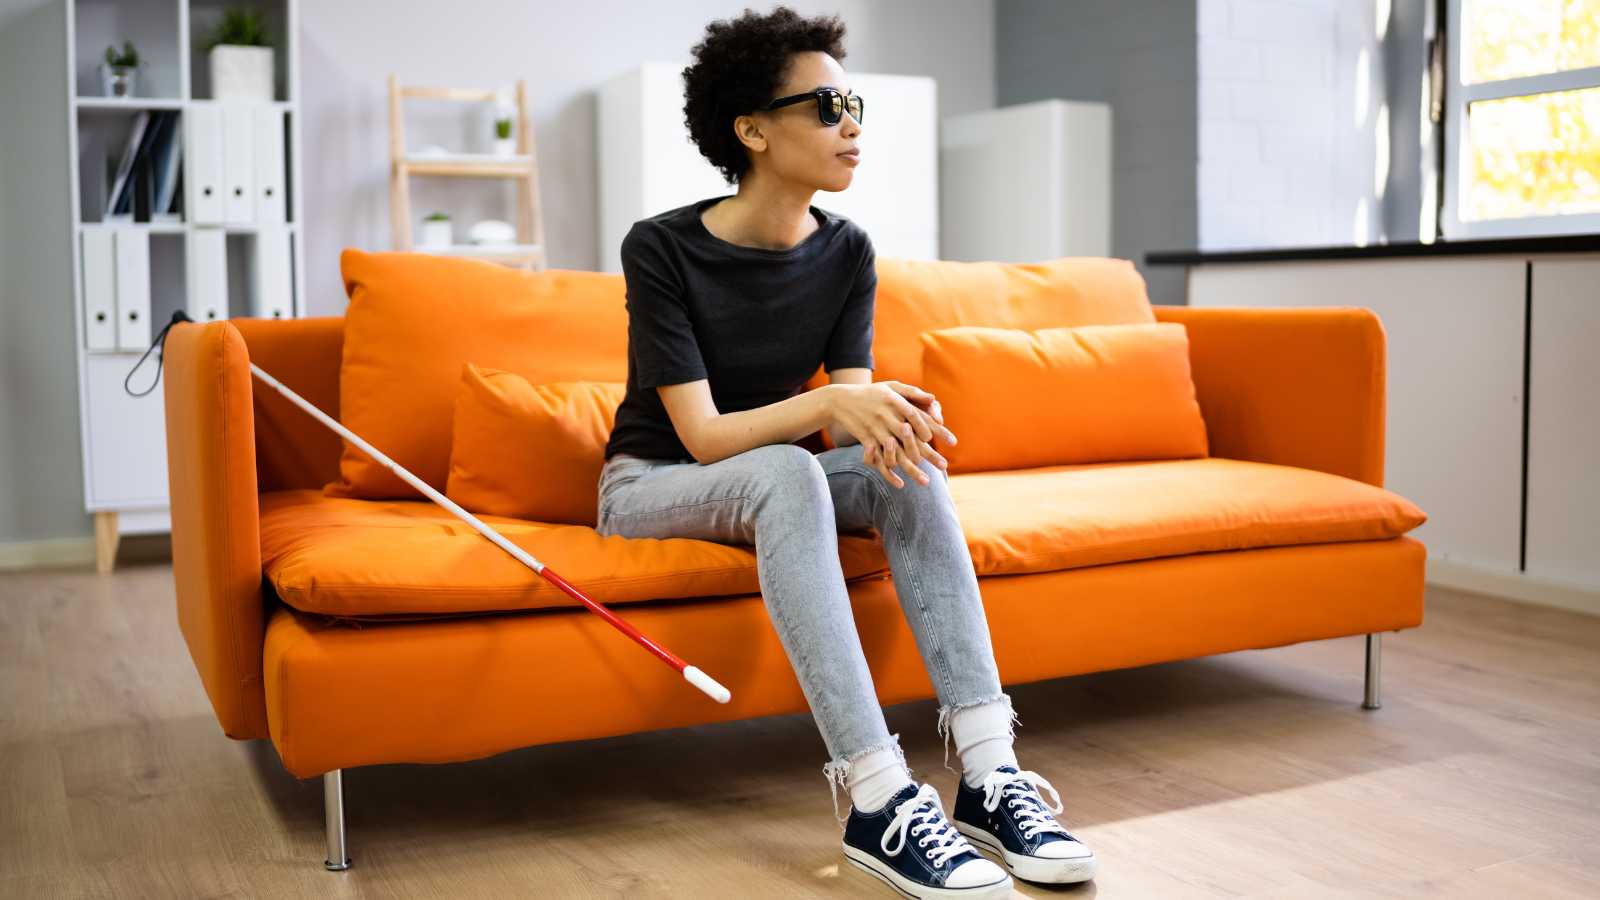 Visual Disabilities - Person with visual impairment sitting on orange sofa in office setting with white cane